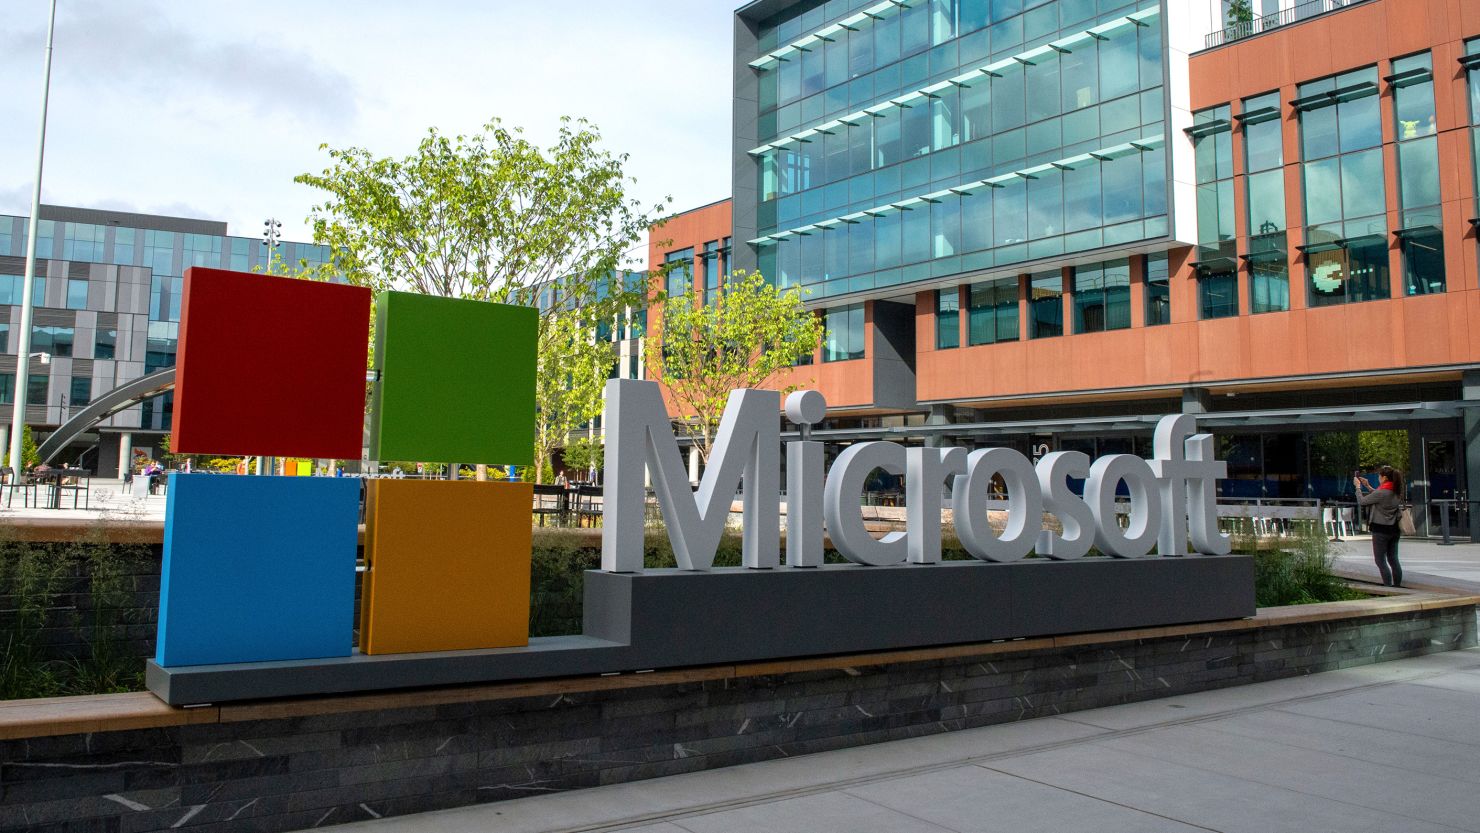 The Microsoft logo can be seen at the headquarters of the software company.